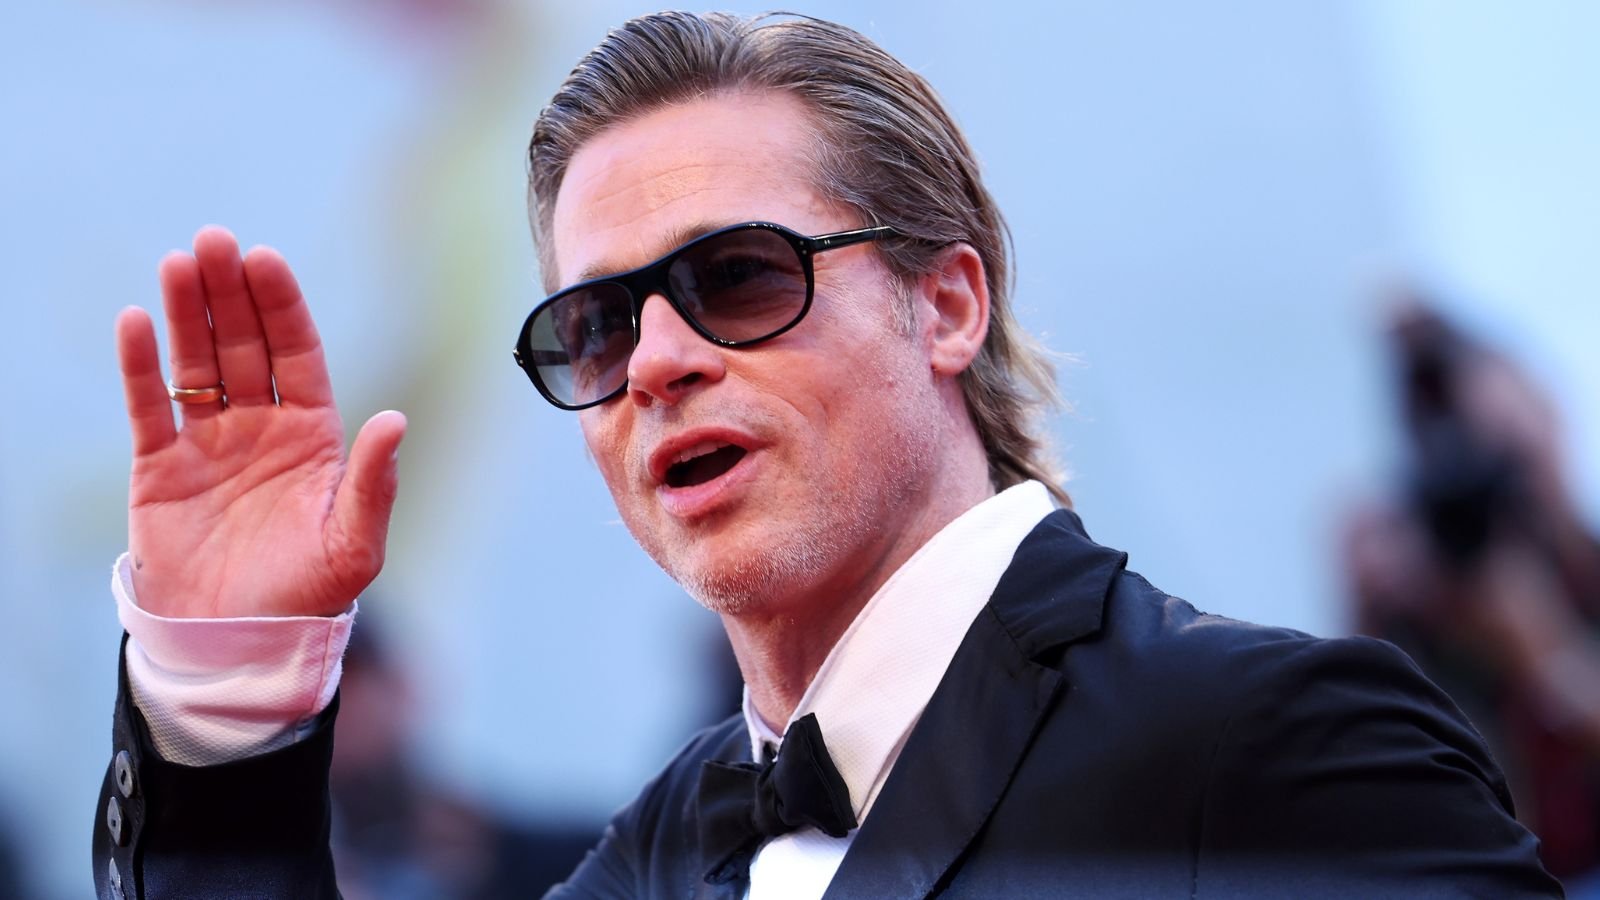 A friendly reminder that Brad Pitt’s next movie is based on Harvey Weinstein and the #MeToo movement